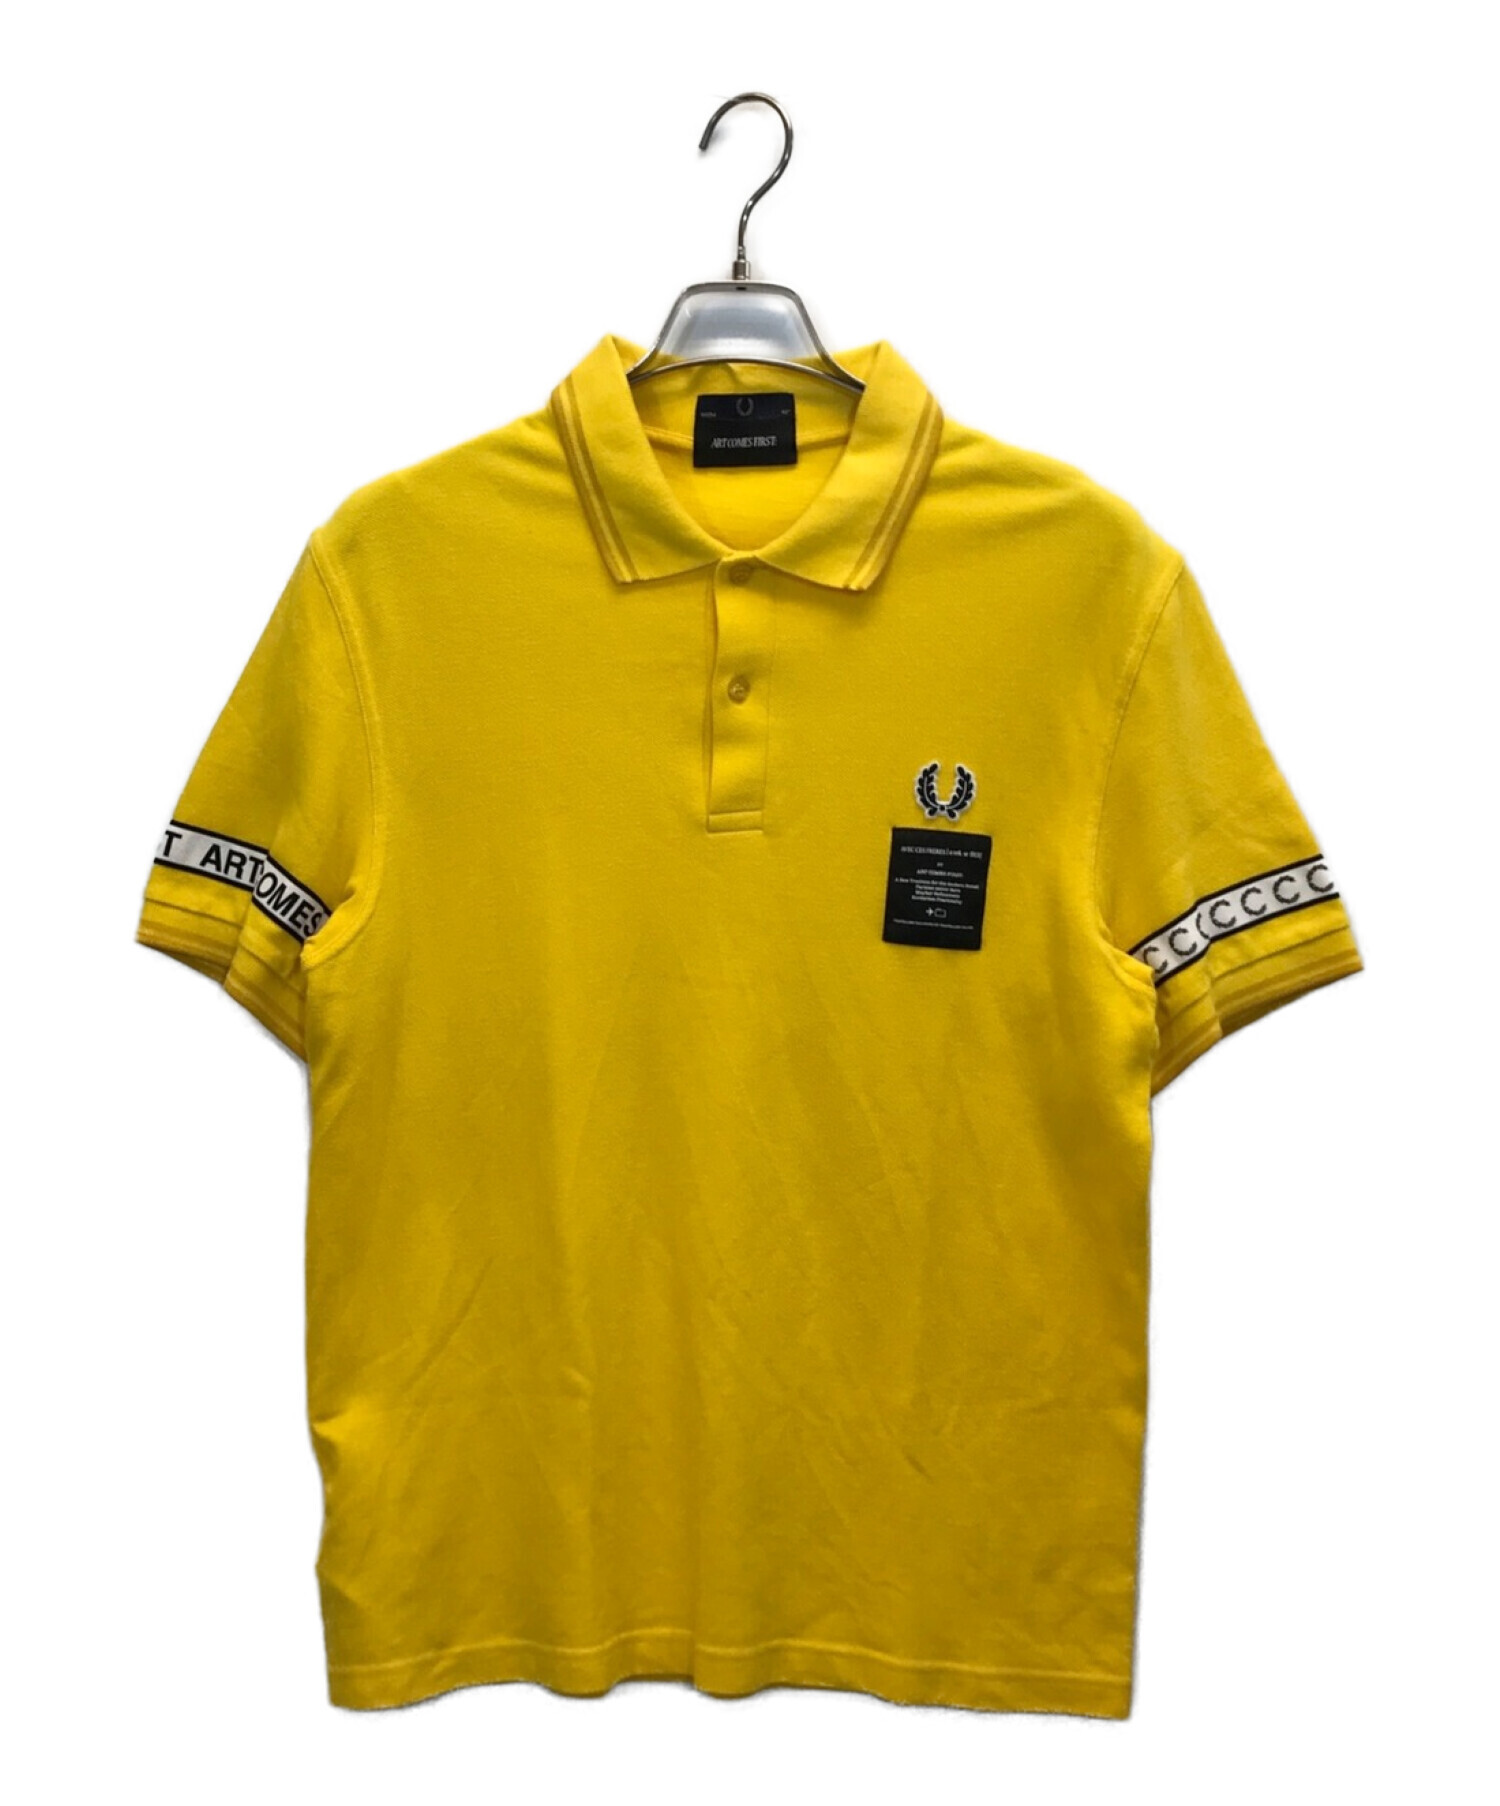 FRED PERRY フレッドペリー ART COMES FIRST ポロシャツ